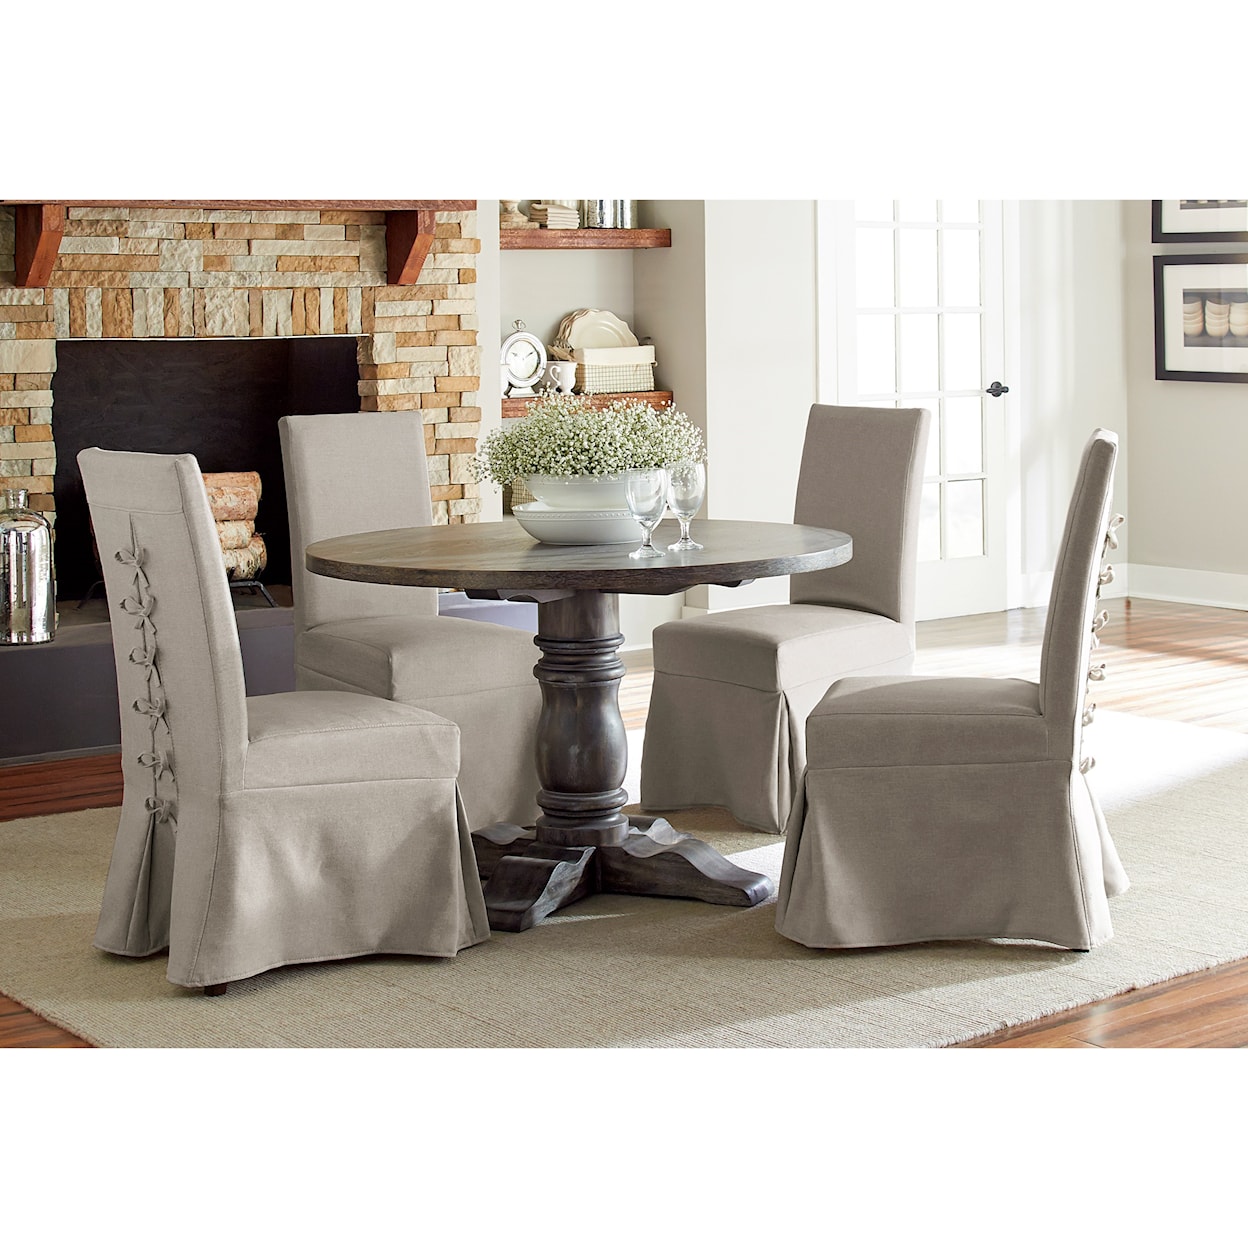 Progressive Furniture Muses Round Dining Table